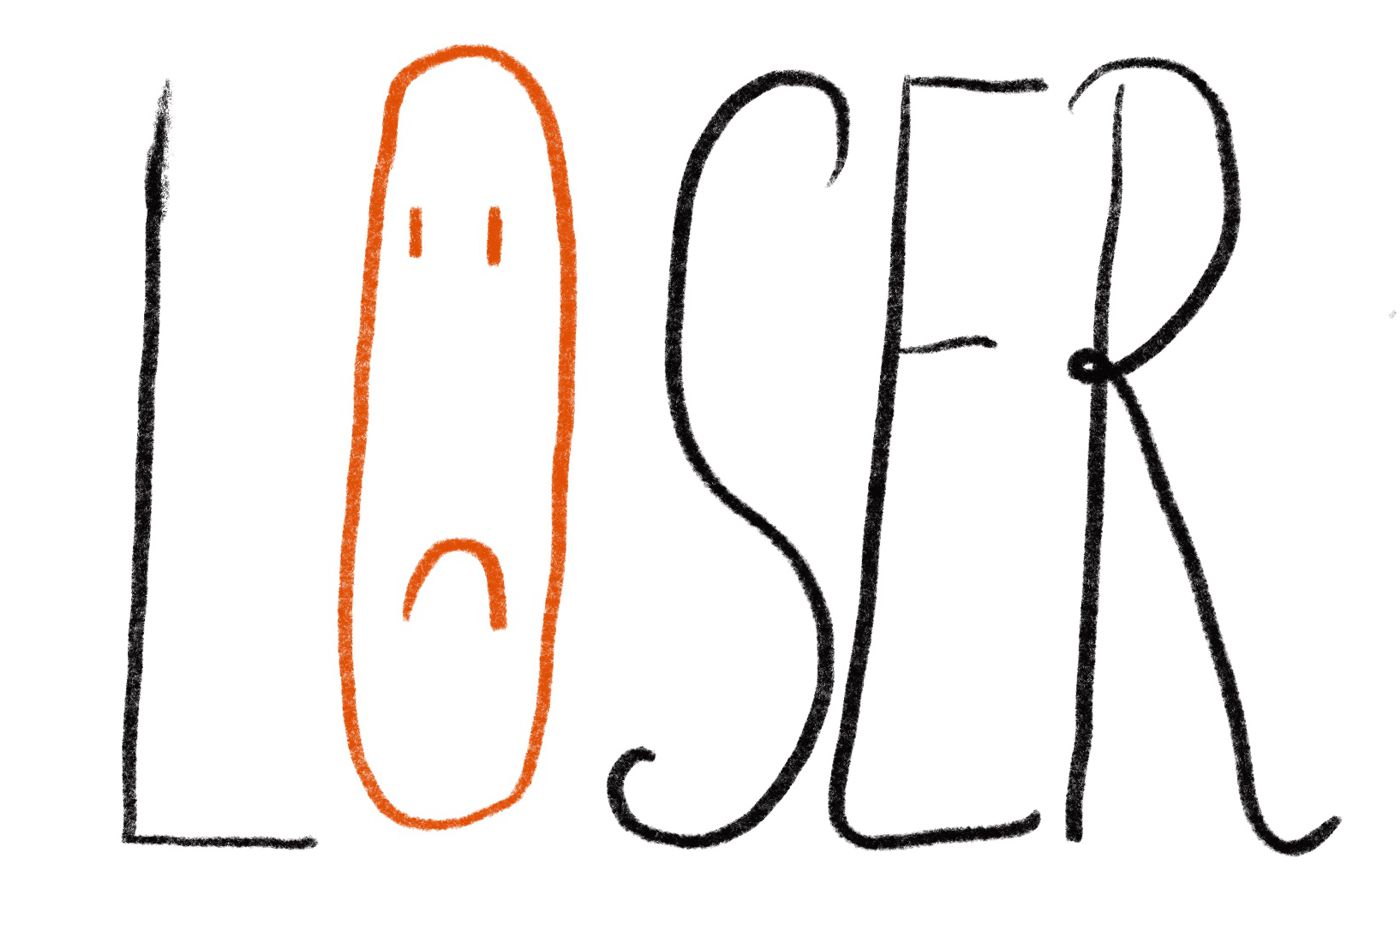 pencil drawing of the word loser with a sad face in the letter o